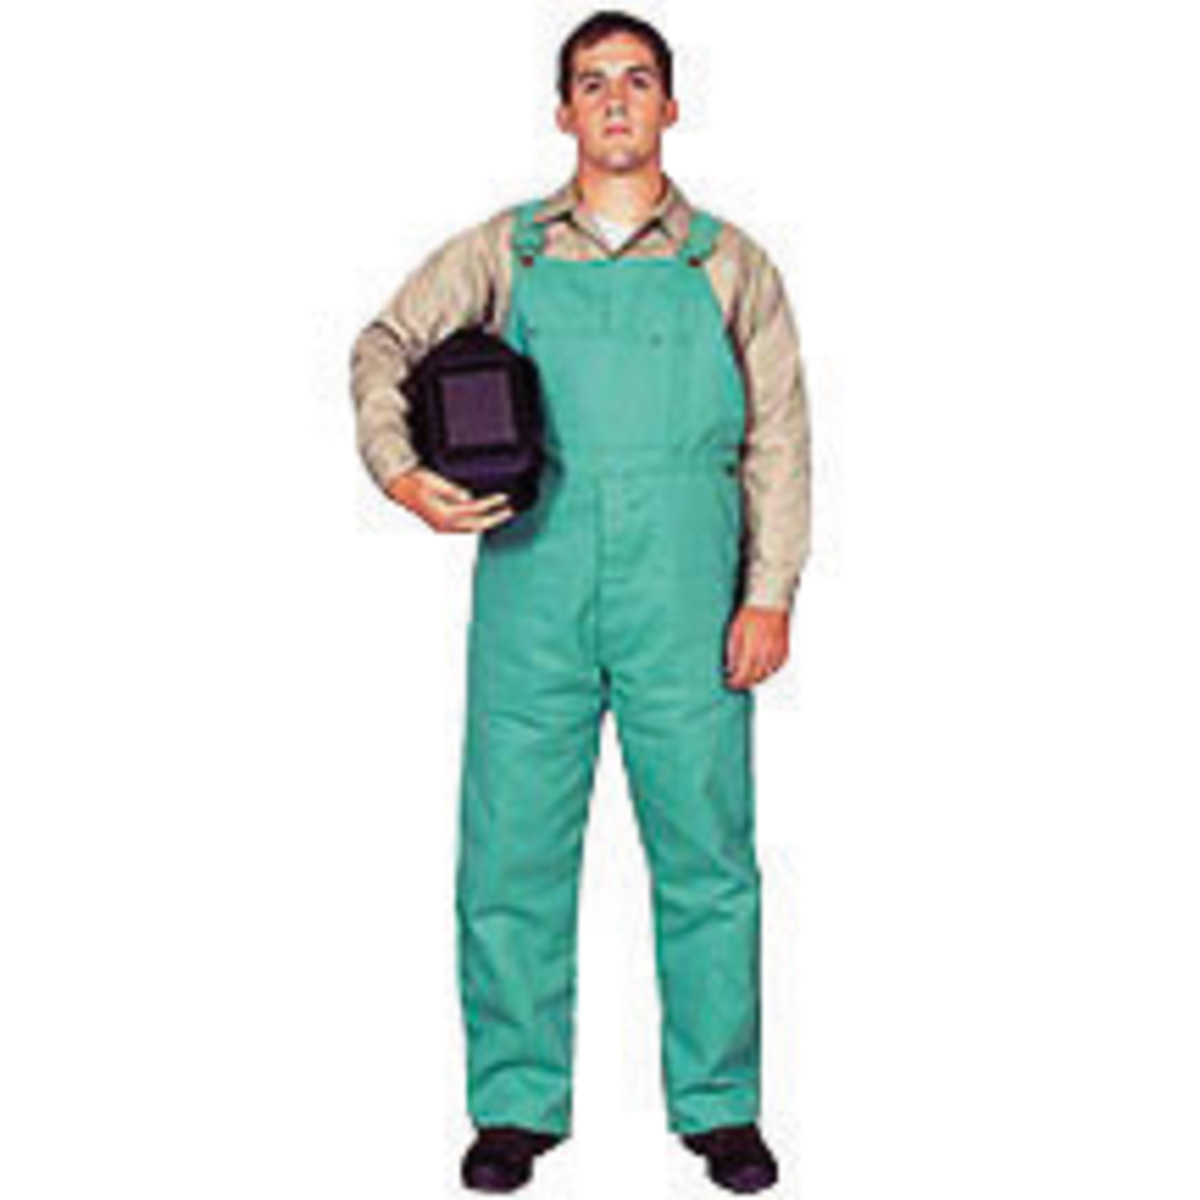 Stanco Safety Products™ Medium Green Cotton Flame Resistant Bibs With Slide Buckle Closure